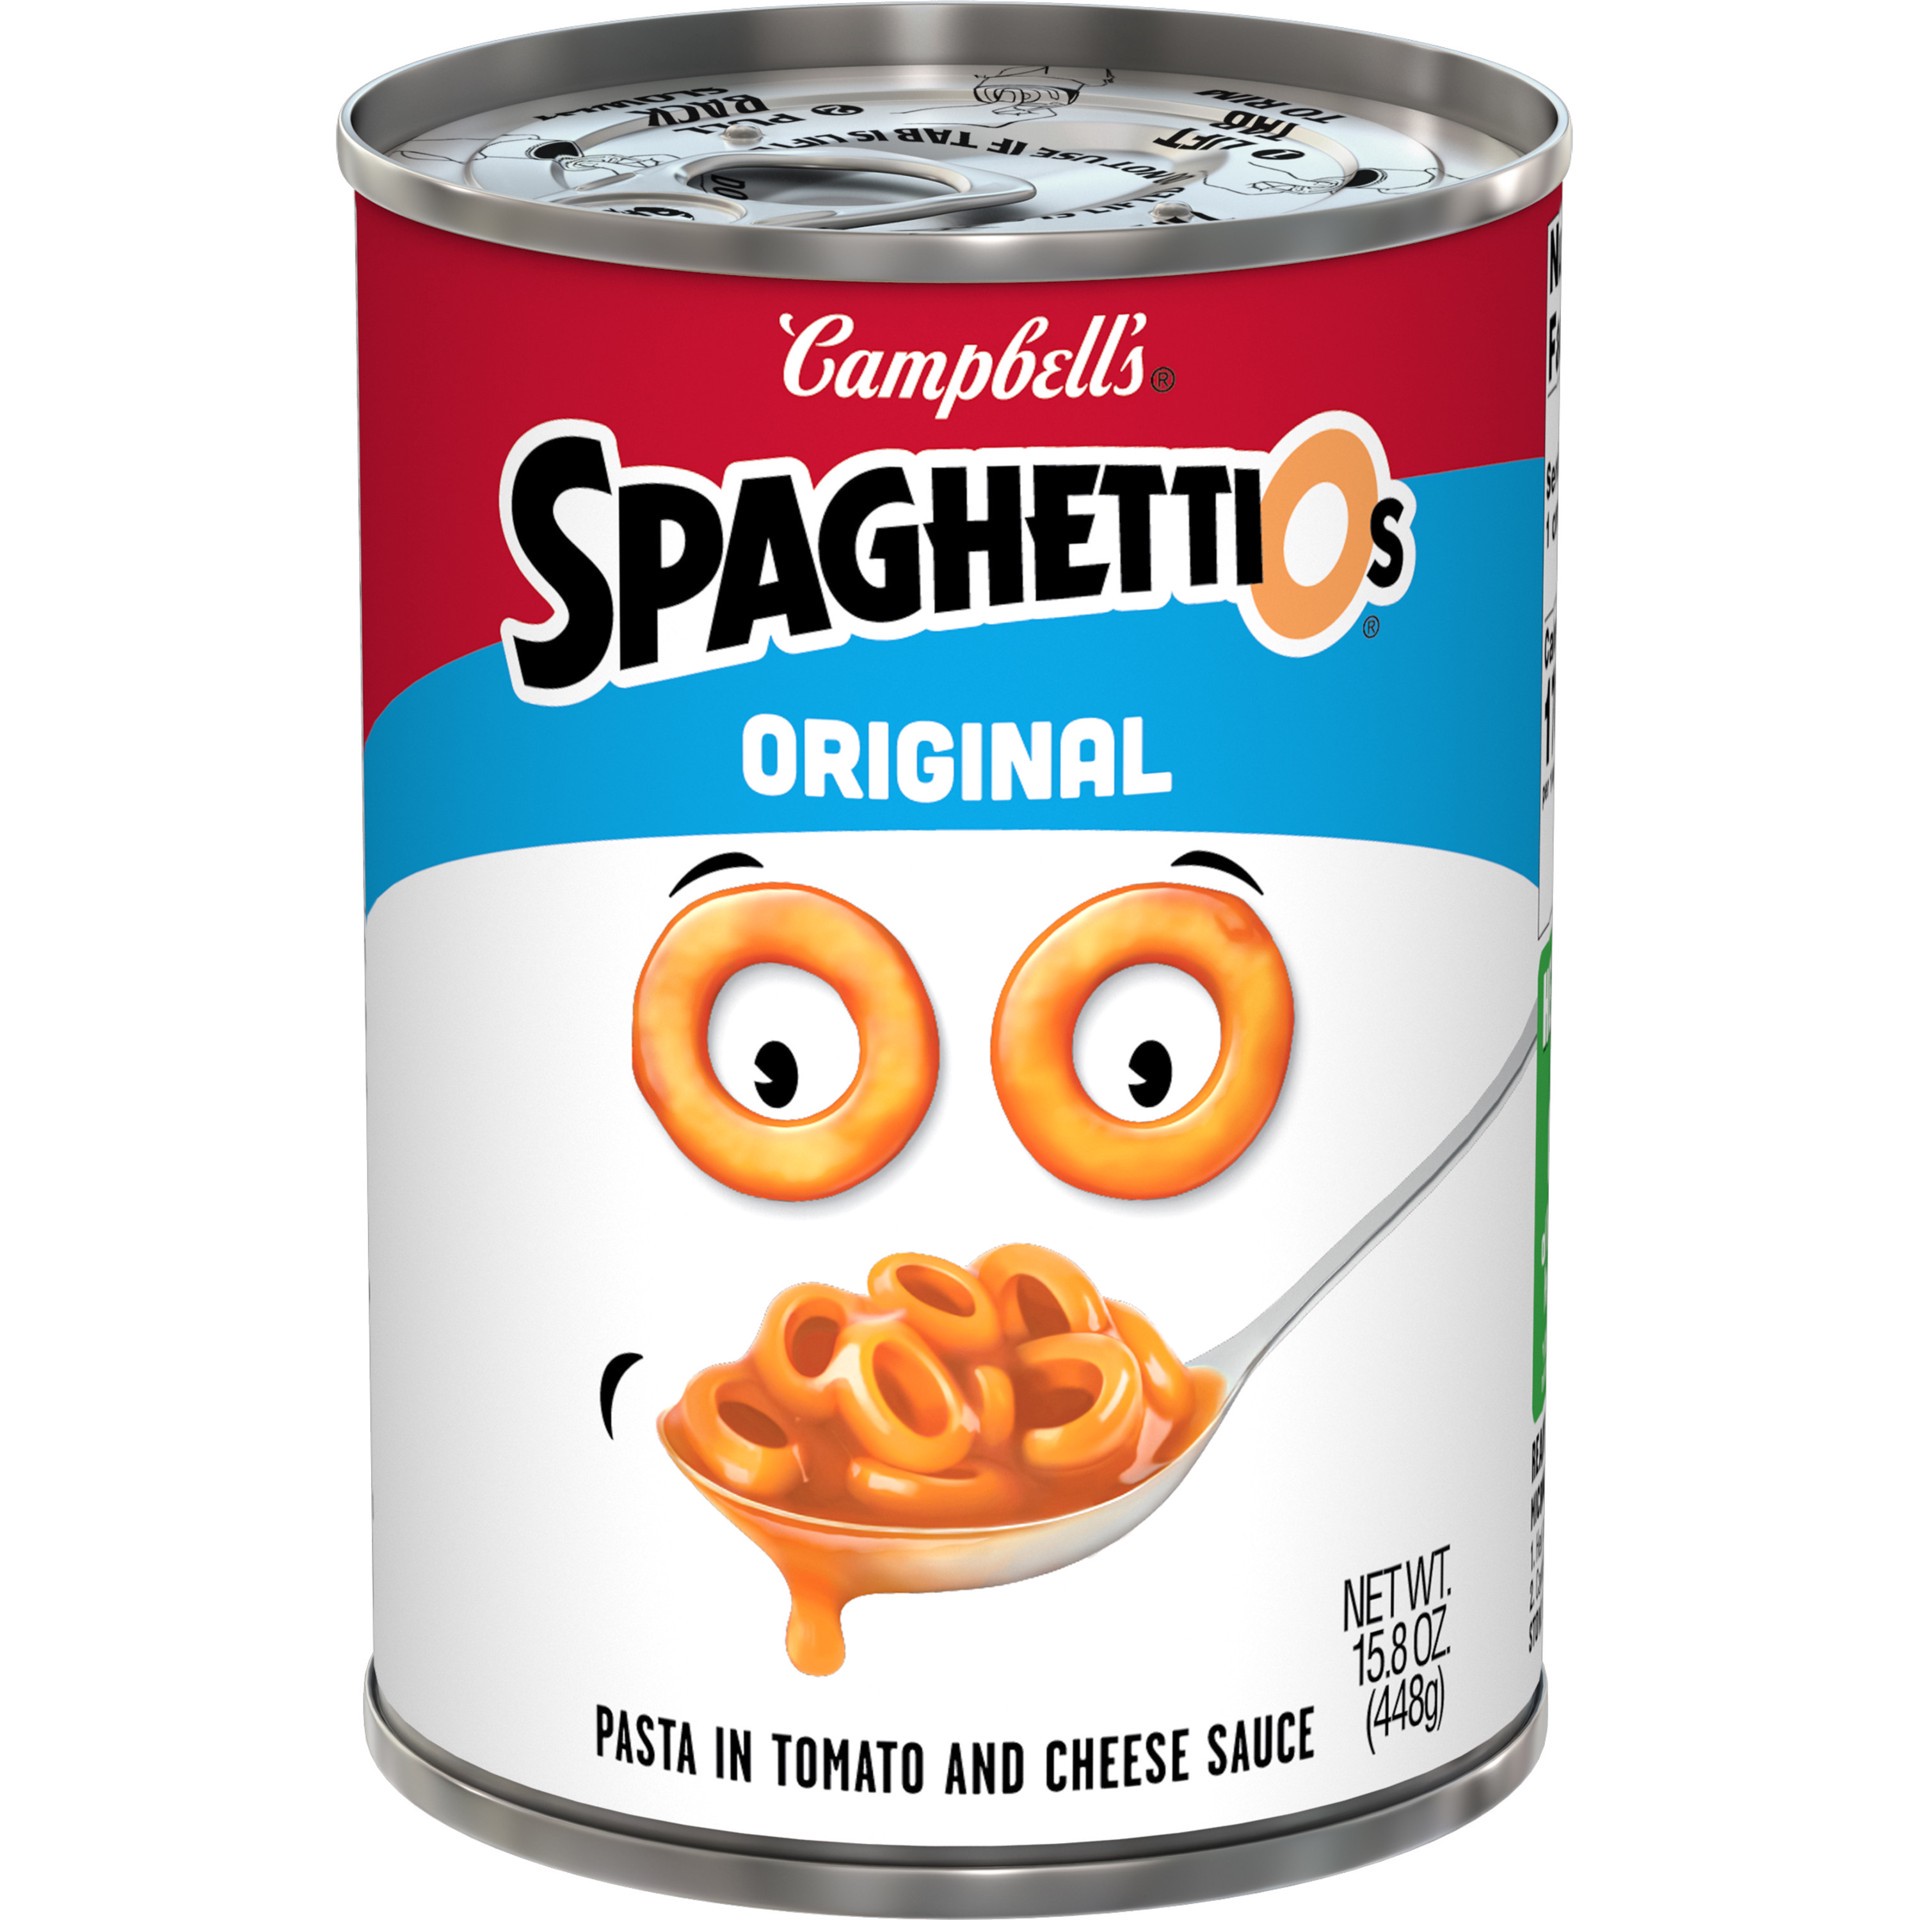 slide 1 of 22, Campbell's SpaghettiOs Original Canned Pasta, 15.8 oz Can, 15.8 oz